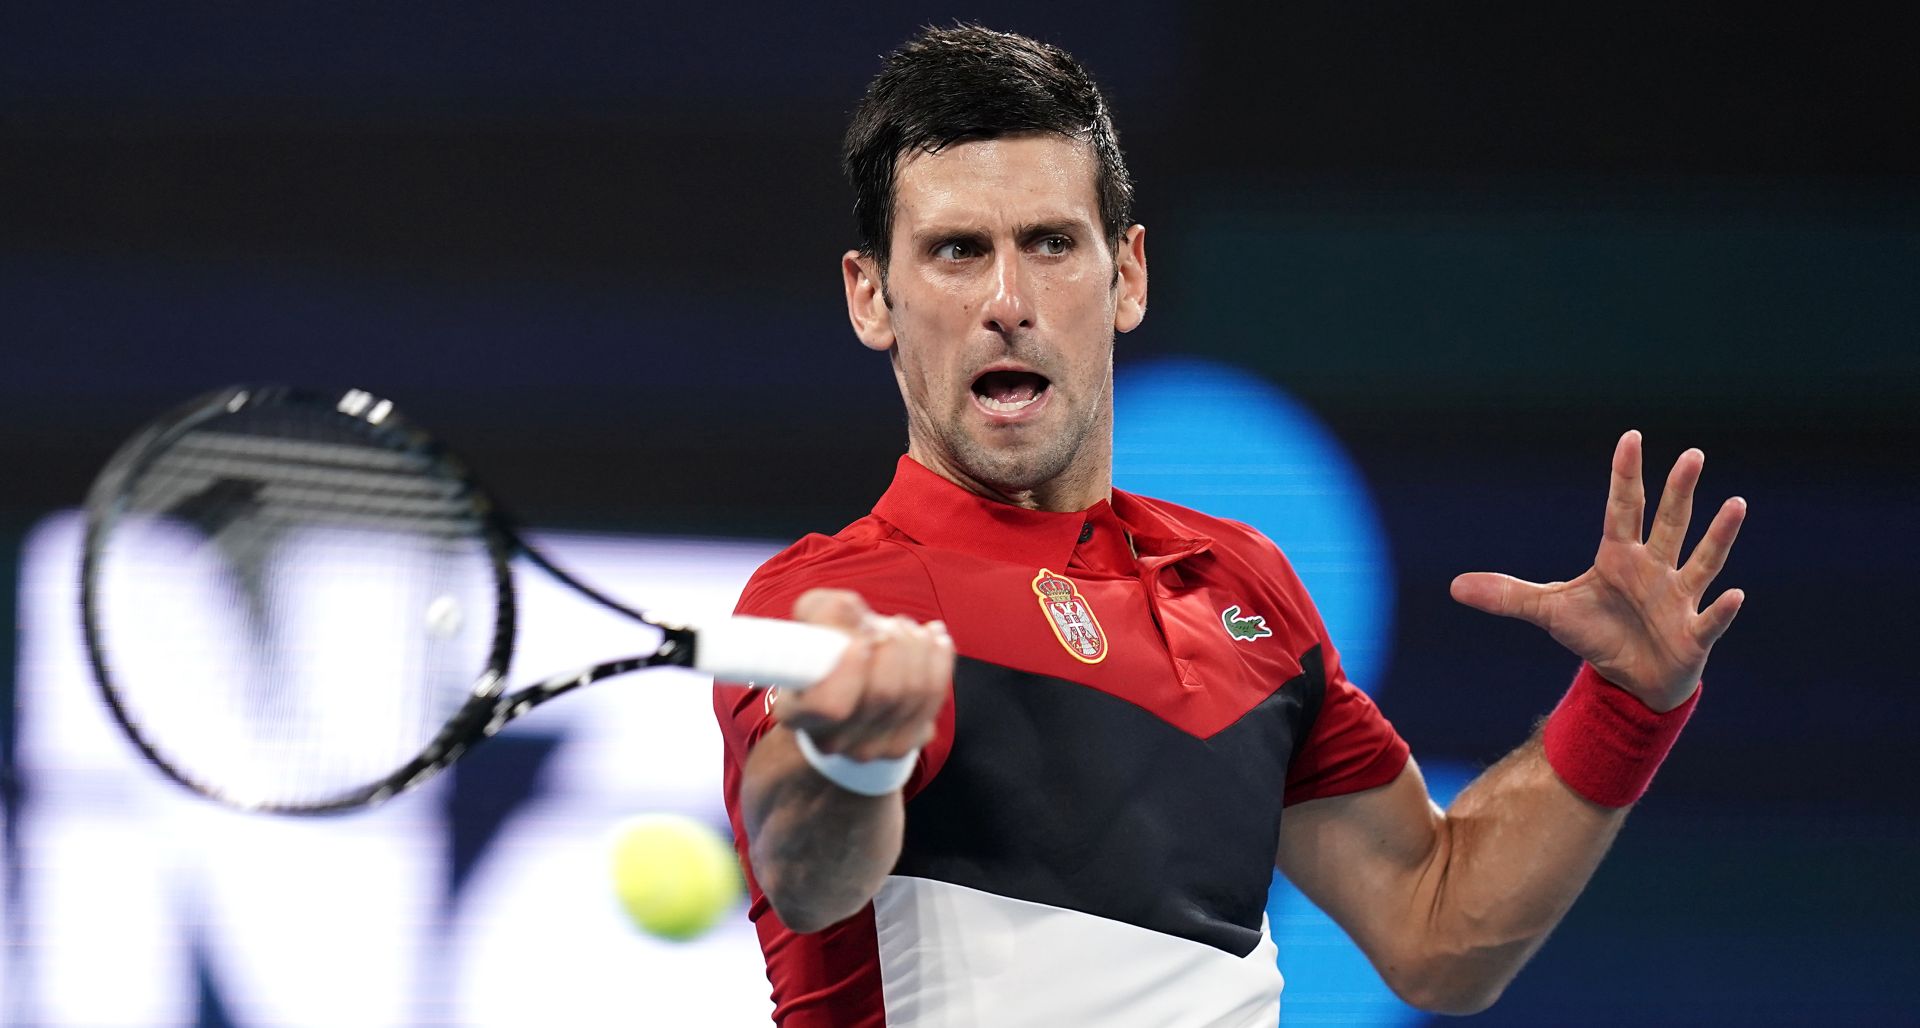 epa08101867 Novak Djokovic of Serbia in action during his singles match against Kevin Anderson of South Africa on day 2 of the ATP Cup tennis tournament at Pat Rafter Arena in Brisbane, Australia, 04 January 2020.  EPA/DAVE HUNT  AUSTRALIA AND NEW ZEALAND OUT  EDITORIAL USE ONLY